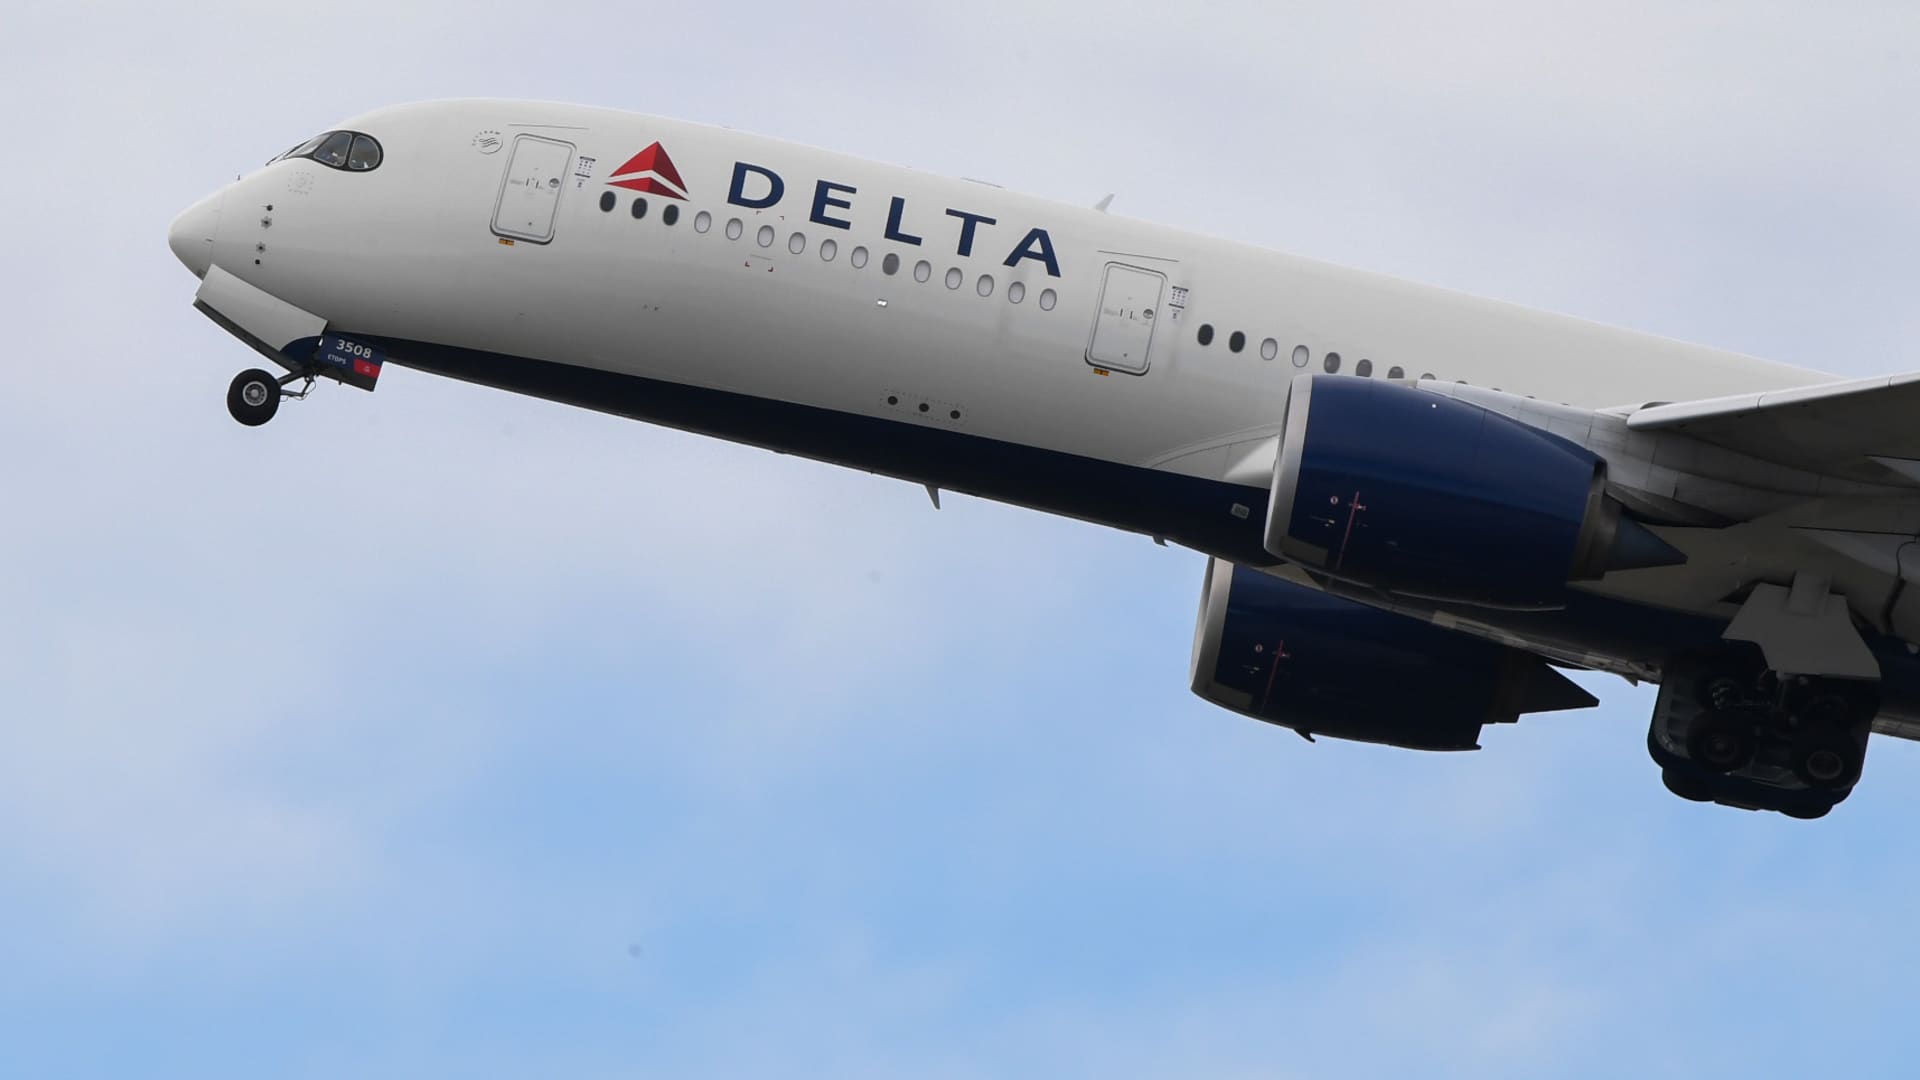 Delta forecasts a quarterly profit as travelers keep flying despite higher fares, helping offset surging fuel costs